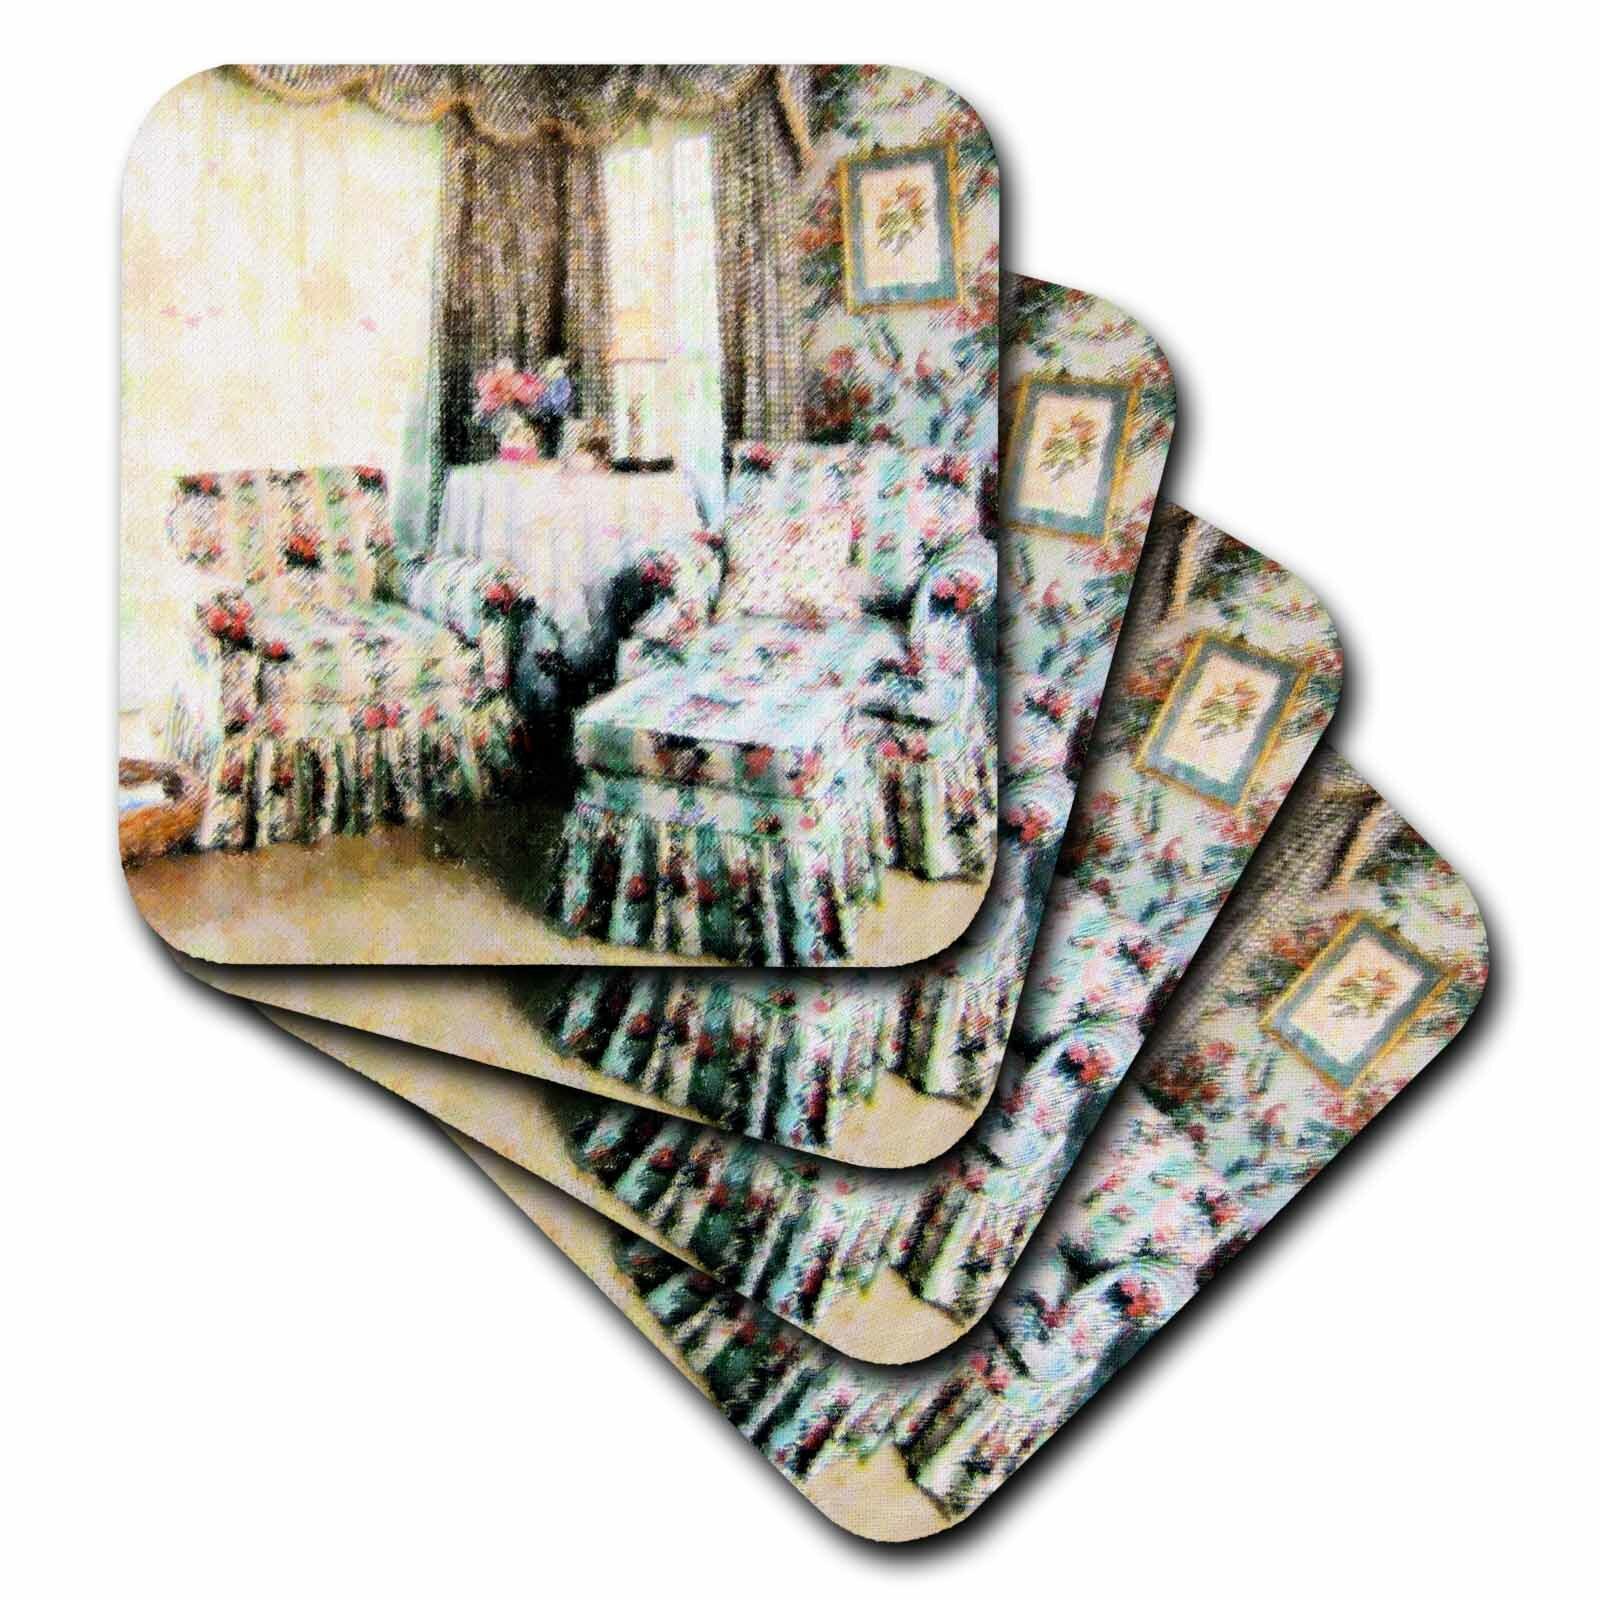 Set of 4 3dRose CST_52337_3 Country Bird House Ceramic Tile Coasters,